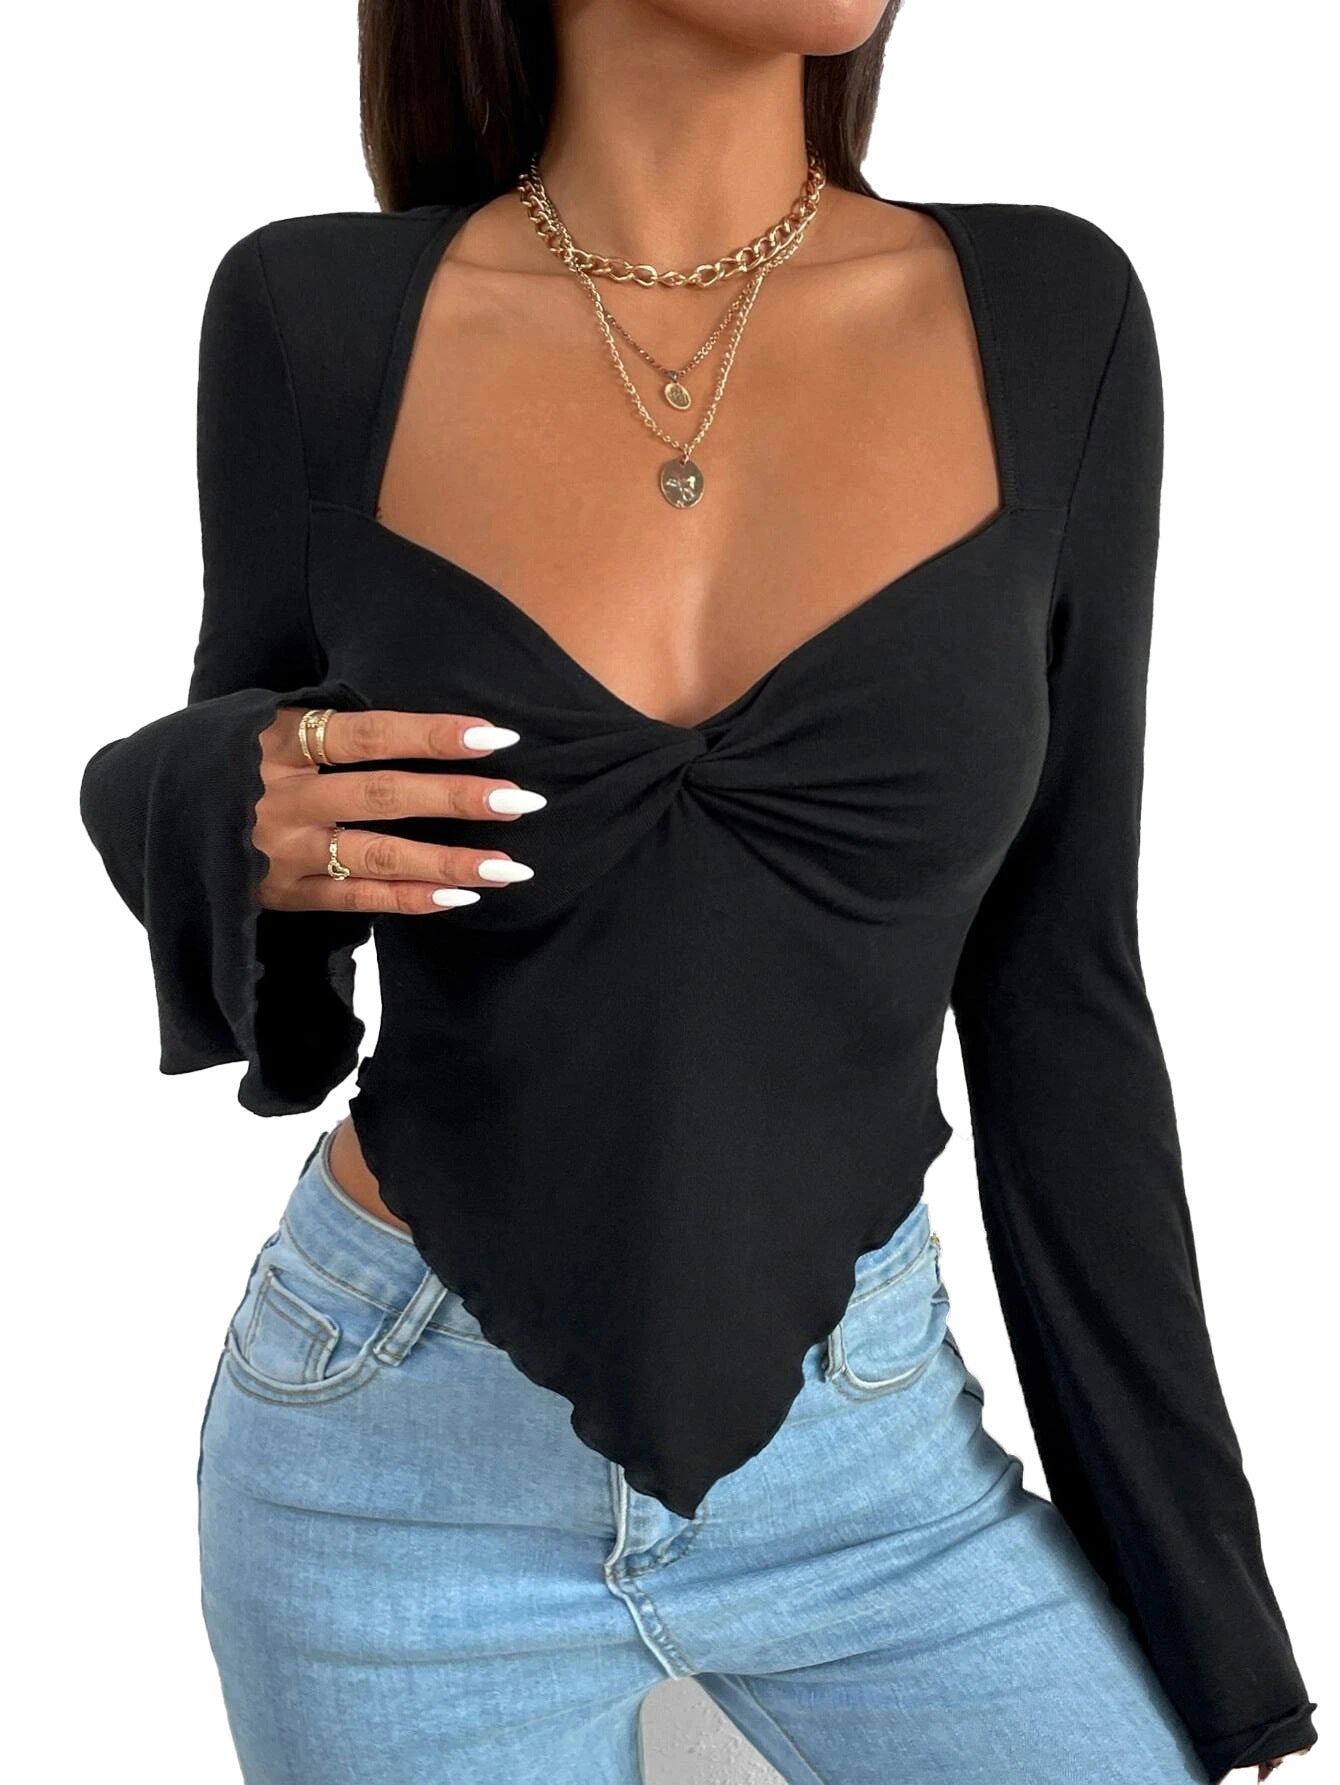 V-neck Flared Sleeves Waist Trimming Knitted Long Sleeve T-shirt